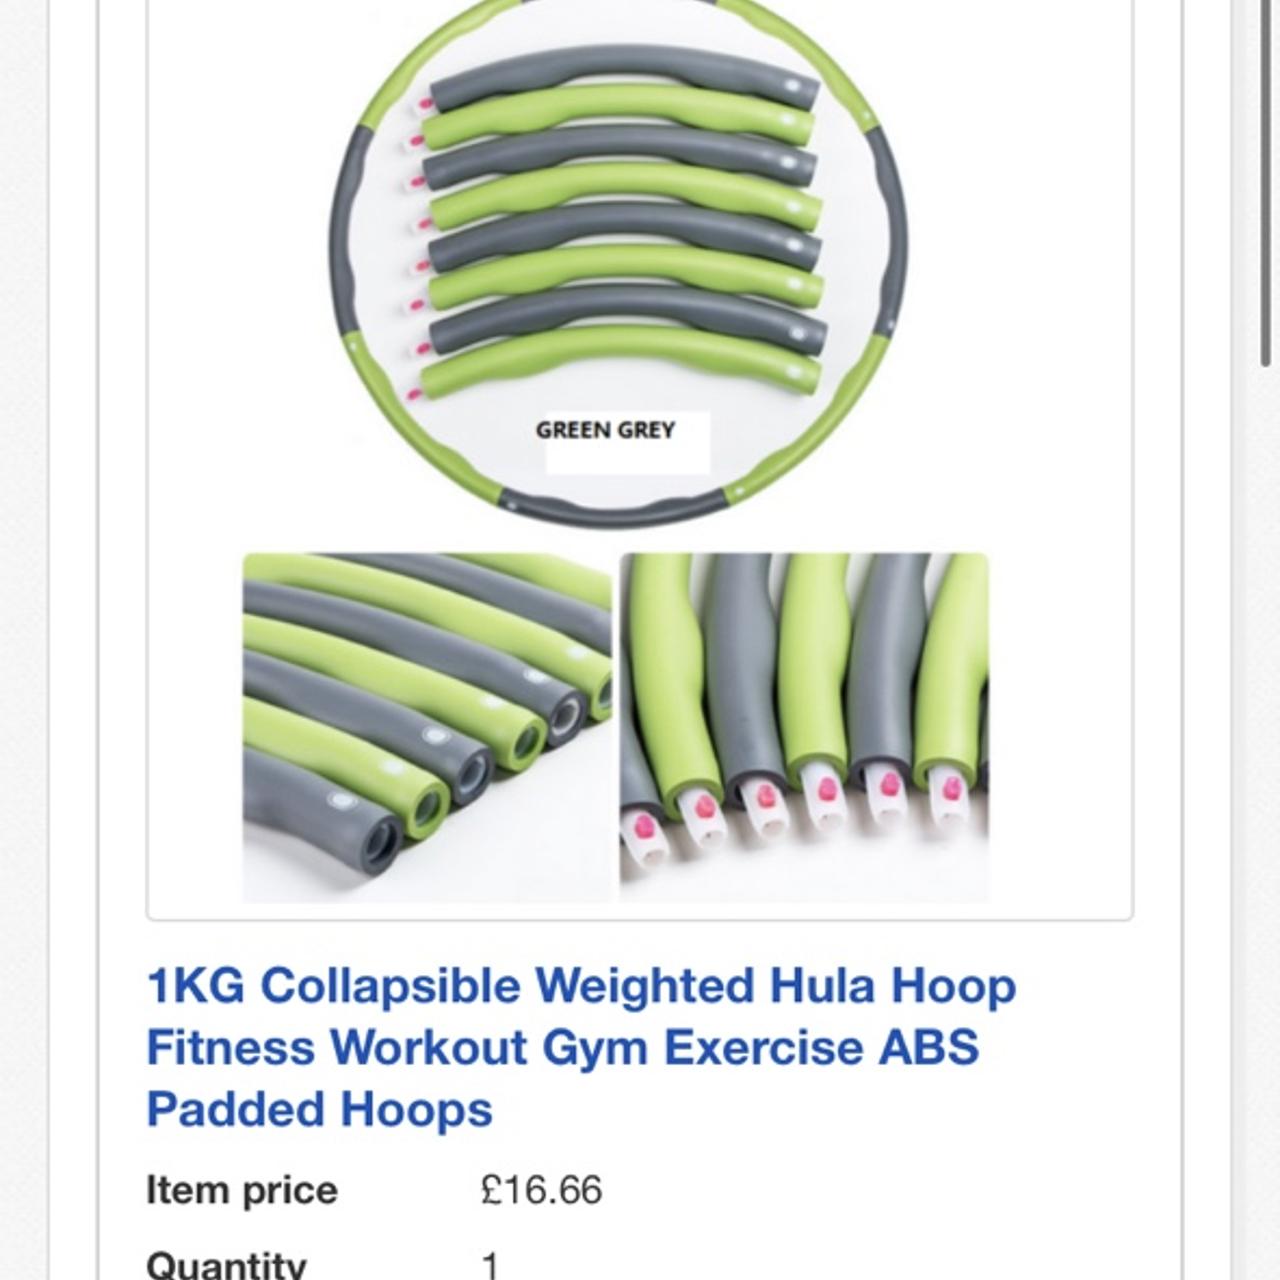 1KG Collapsible Weighted Hula Hoop Fitness Workout Gym Exercise ABS Padded Hoops 